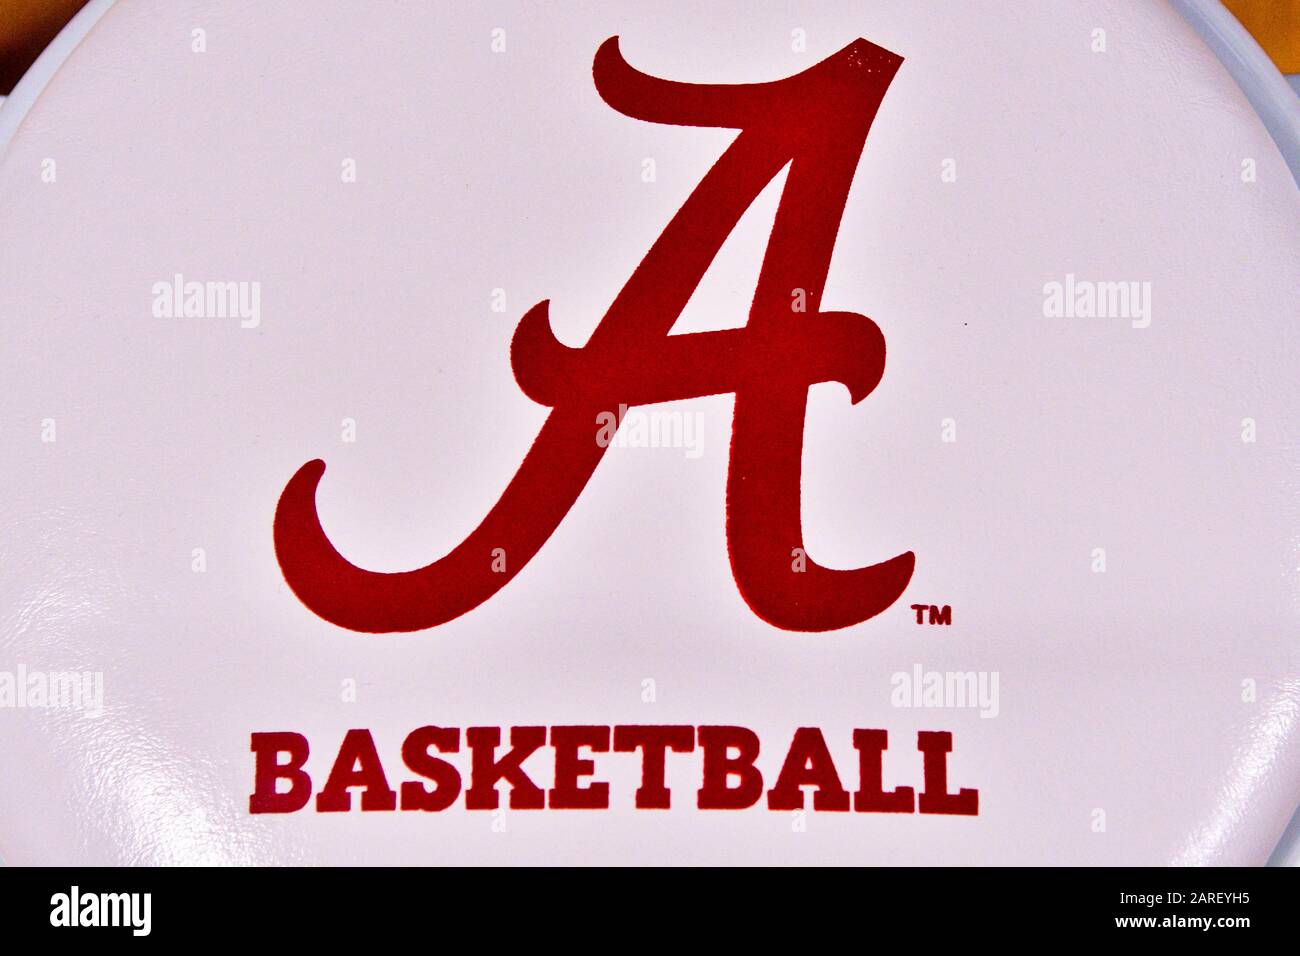 An Alabama Crimson Tide logo court side on a seat prior to an NCAA SEC basketball game between the Vanderbilt Commodores and the Alabama Crimson Tide at Memorial Gym. Wednesday, Jan 22, 2020, in Nashville. (Photo by IOS/ESPA-Images) Stock Photo